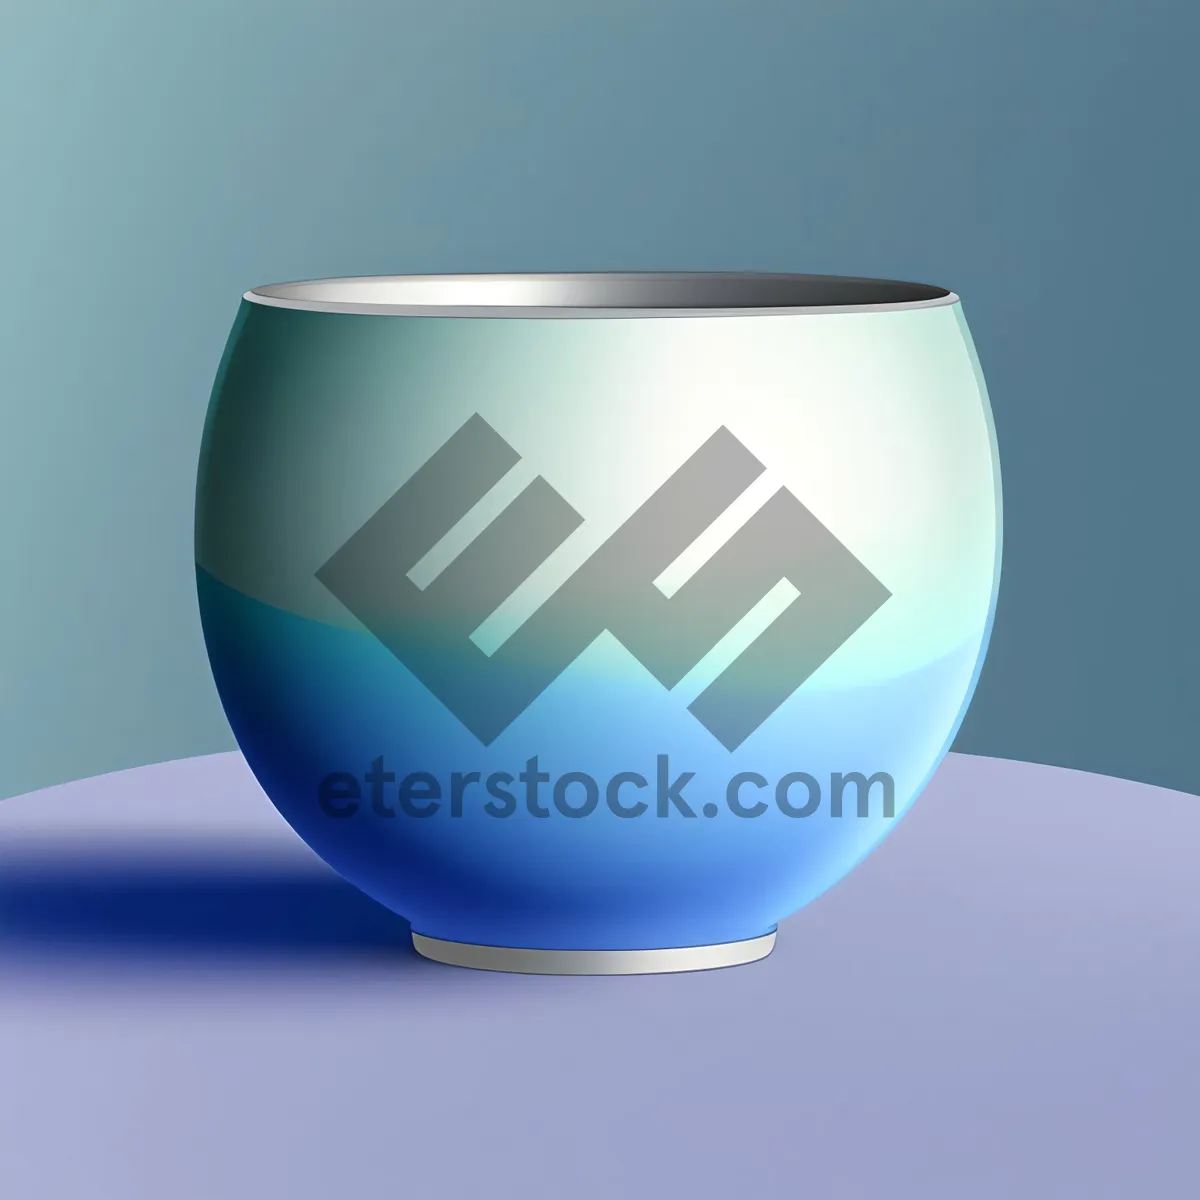 Picture of Mixing Bowl with Glass and Drink